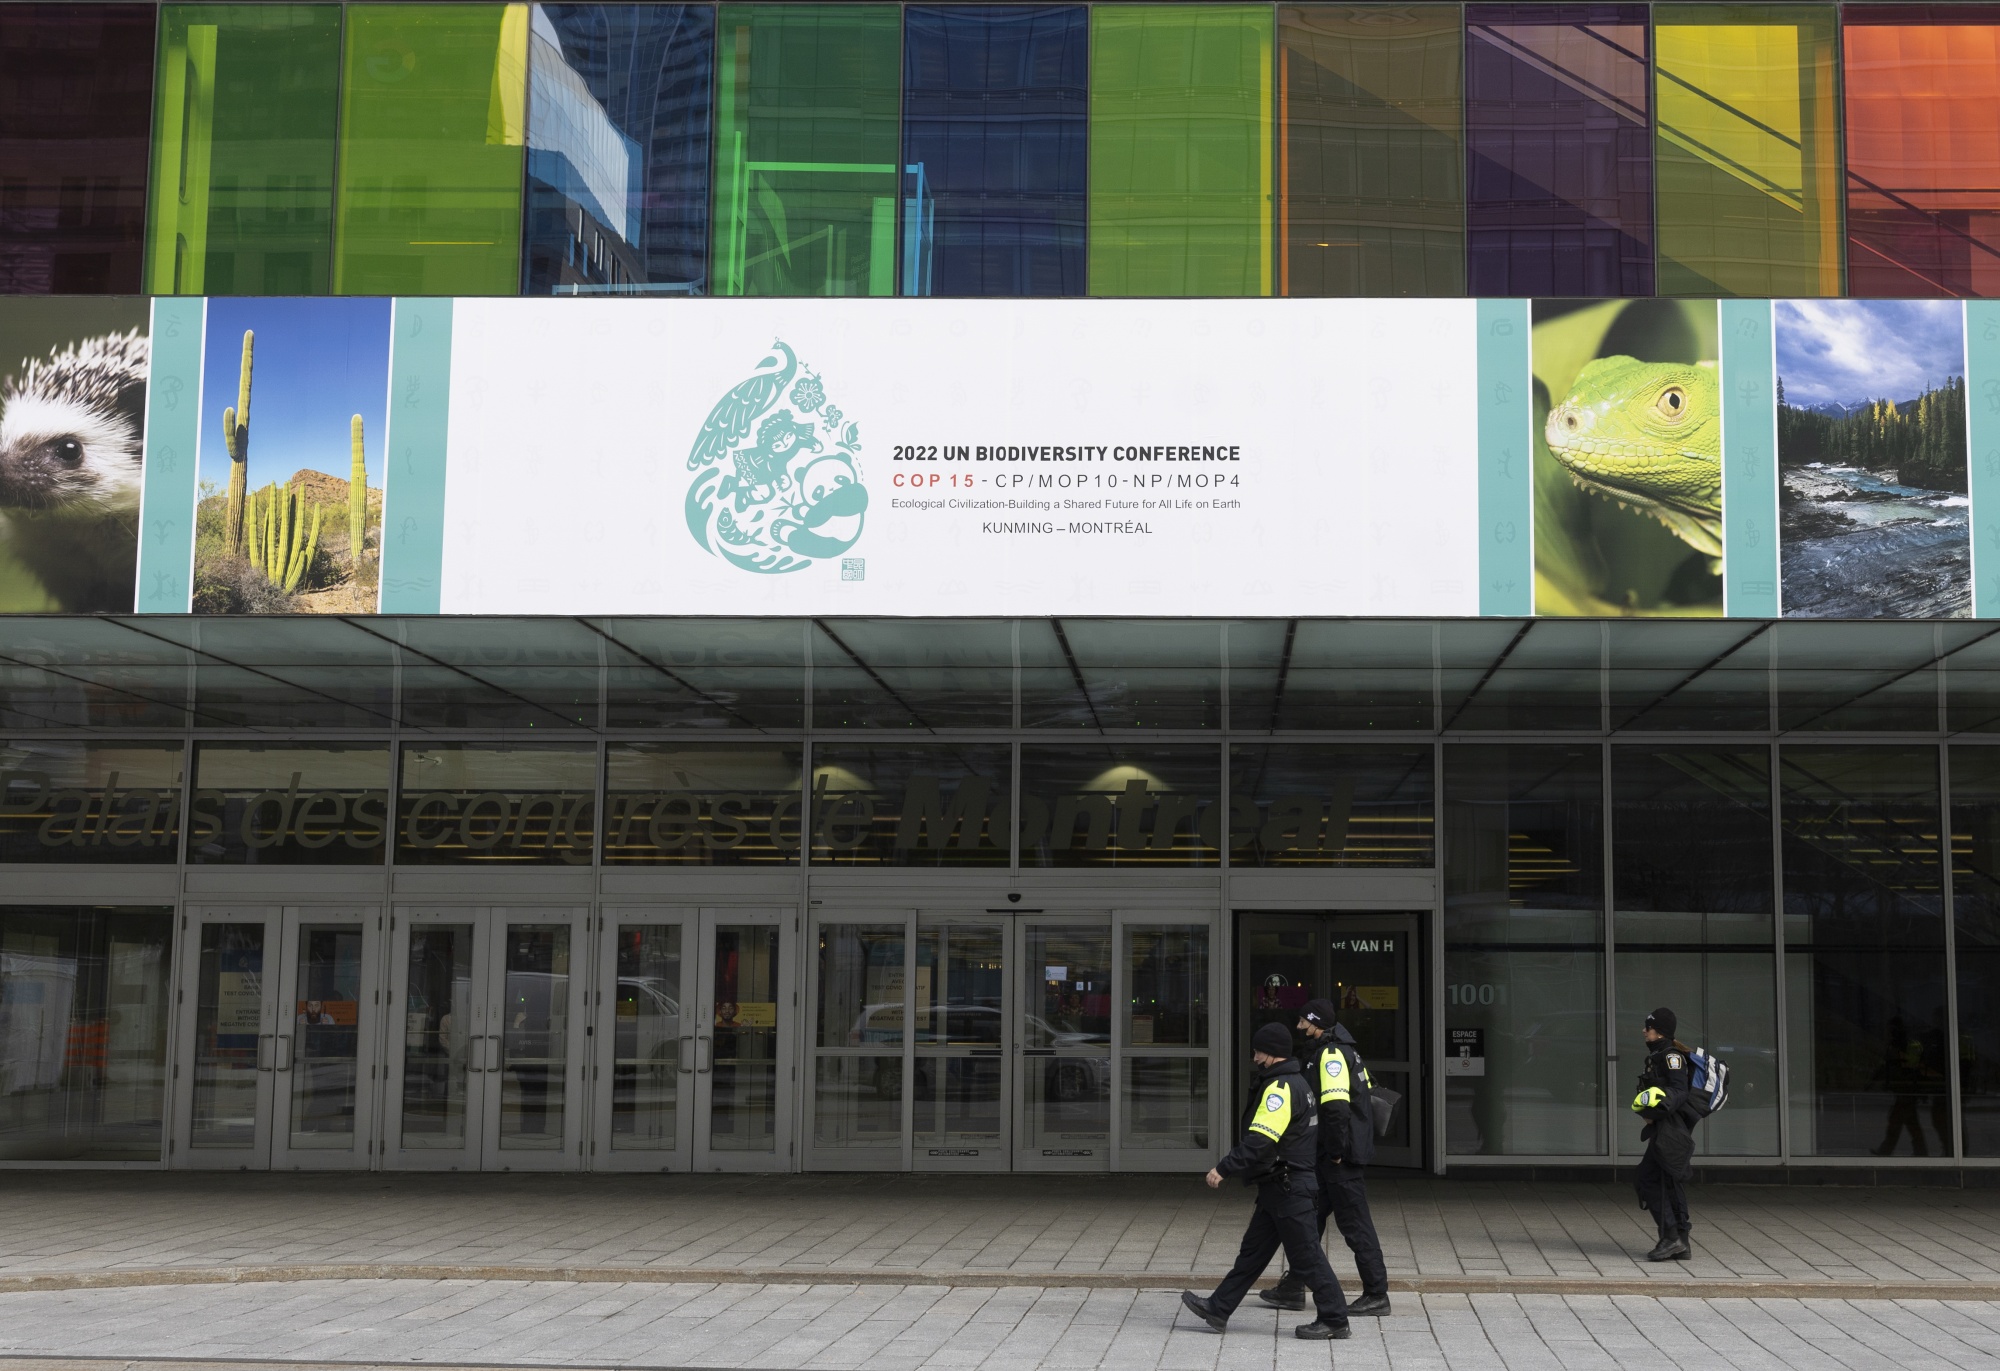 COP15: What Can You Expect From the UN Biodiversity Conference - Bloomberg